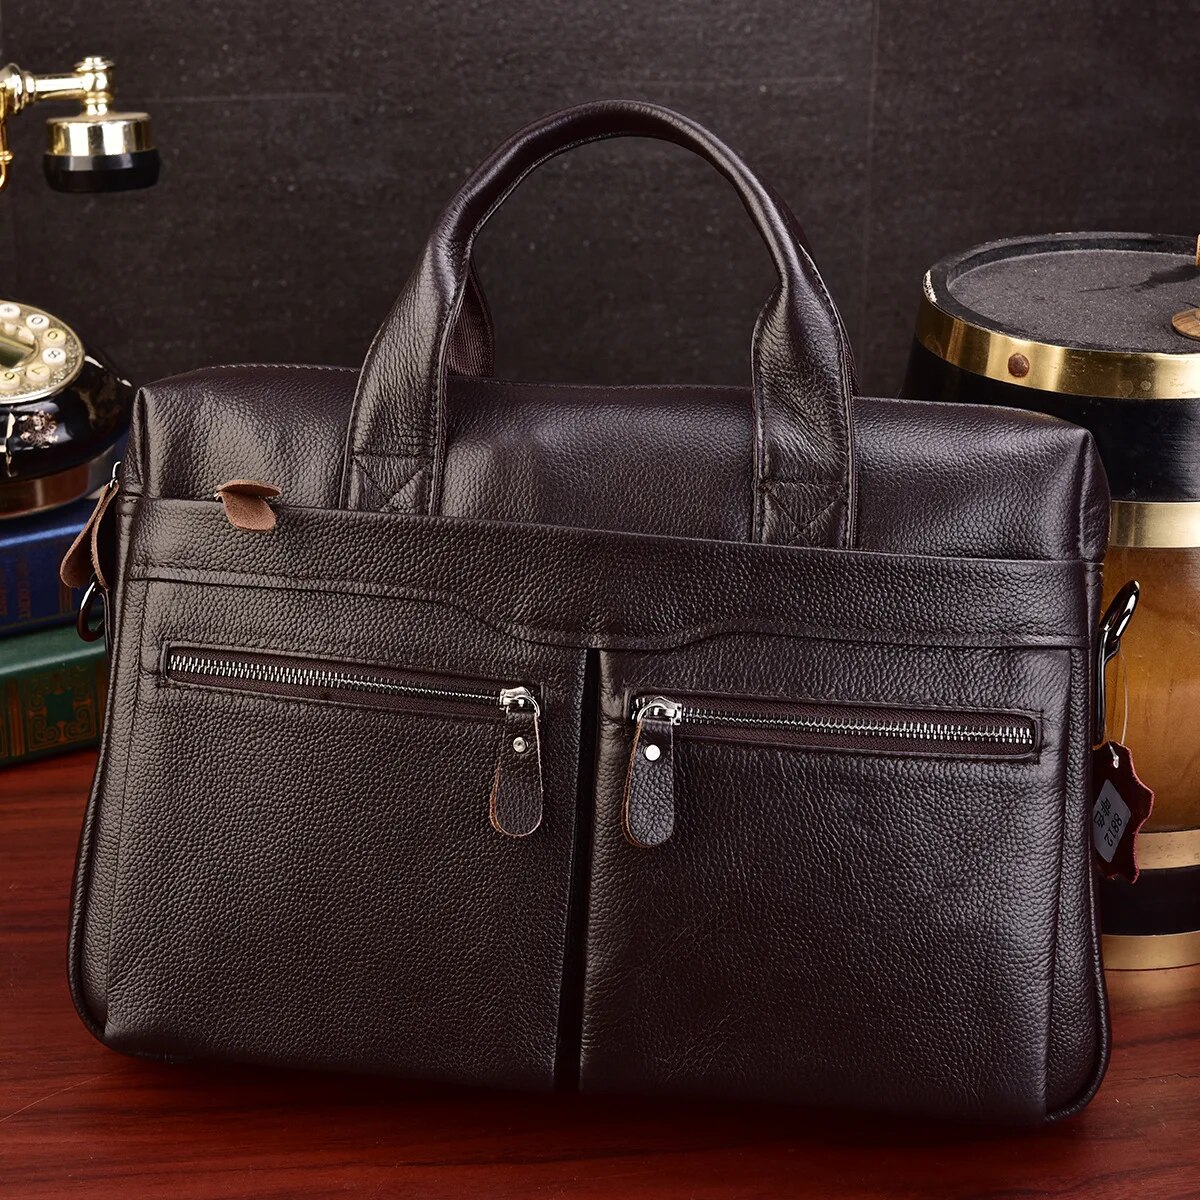 come4buy.com-Business Briefcases Men Wana ngozi ya Ng'ombe Fit 14'' Laptop Bag